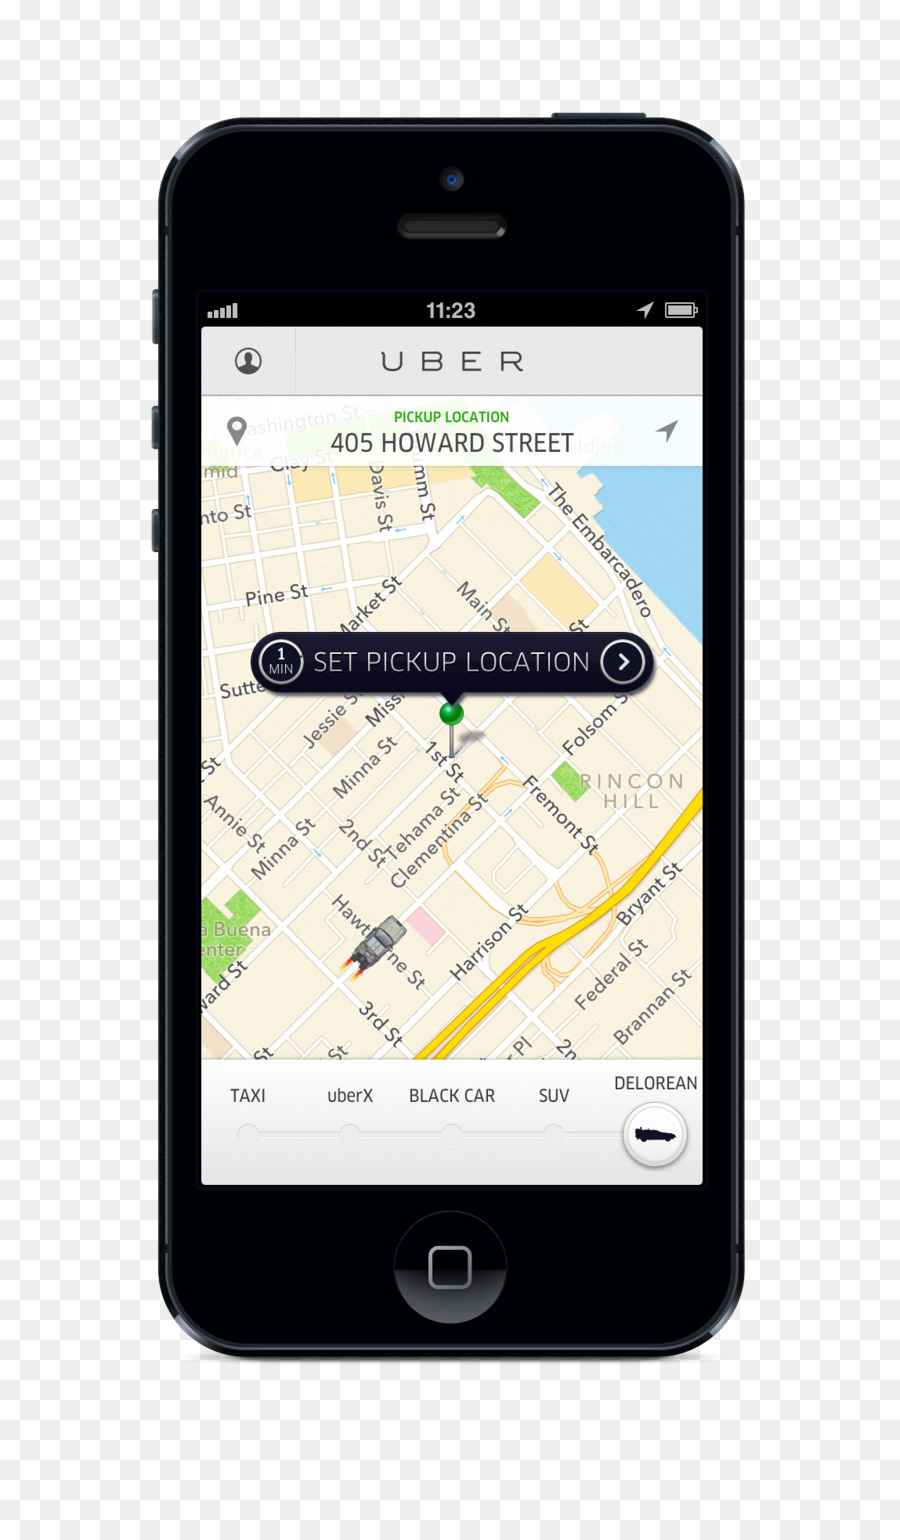 Uber Android Smartphone - Android